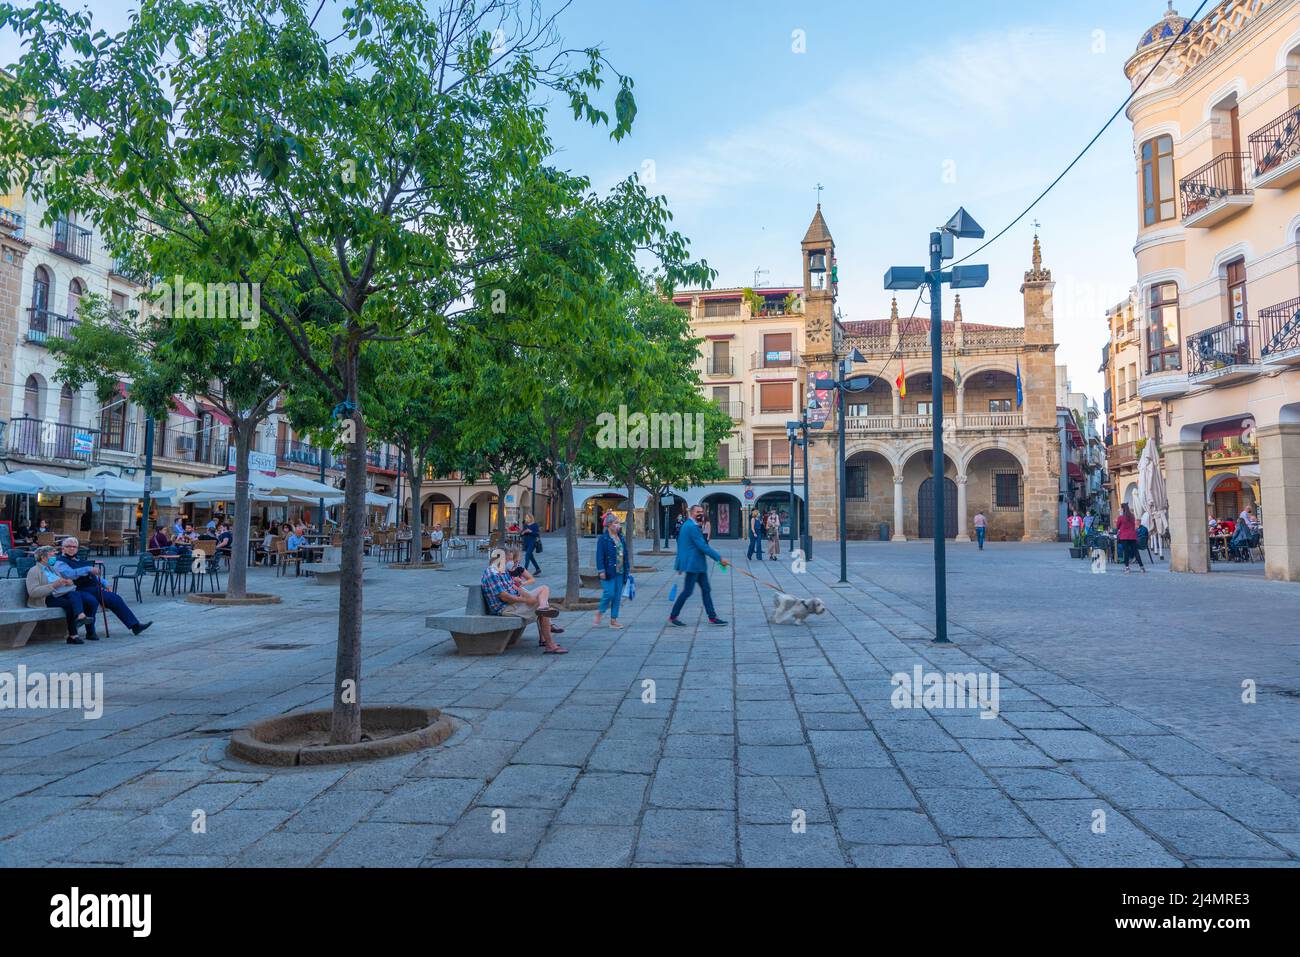 Plasencia, Spain, May 18, 2021: People are strolling on Plaza San Nicolas in Spanish town Plasencia Stock Photo